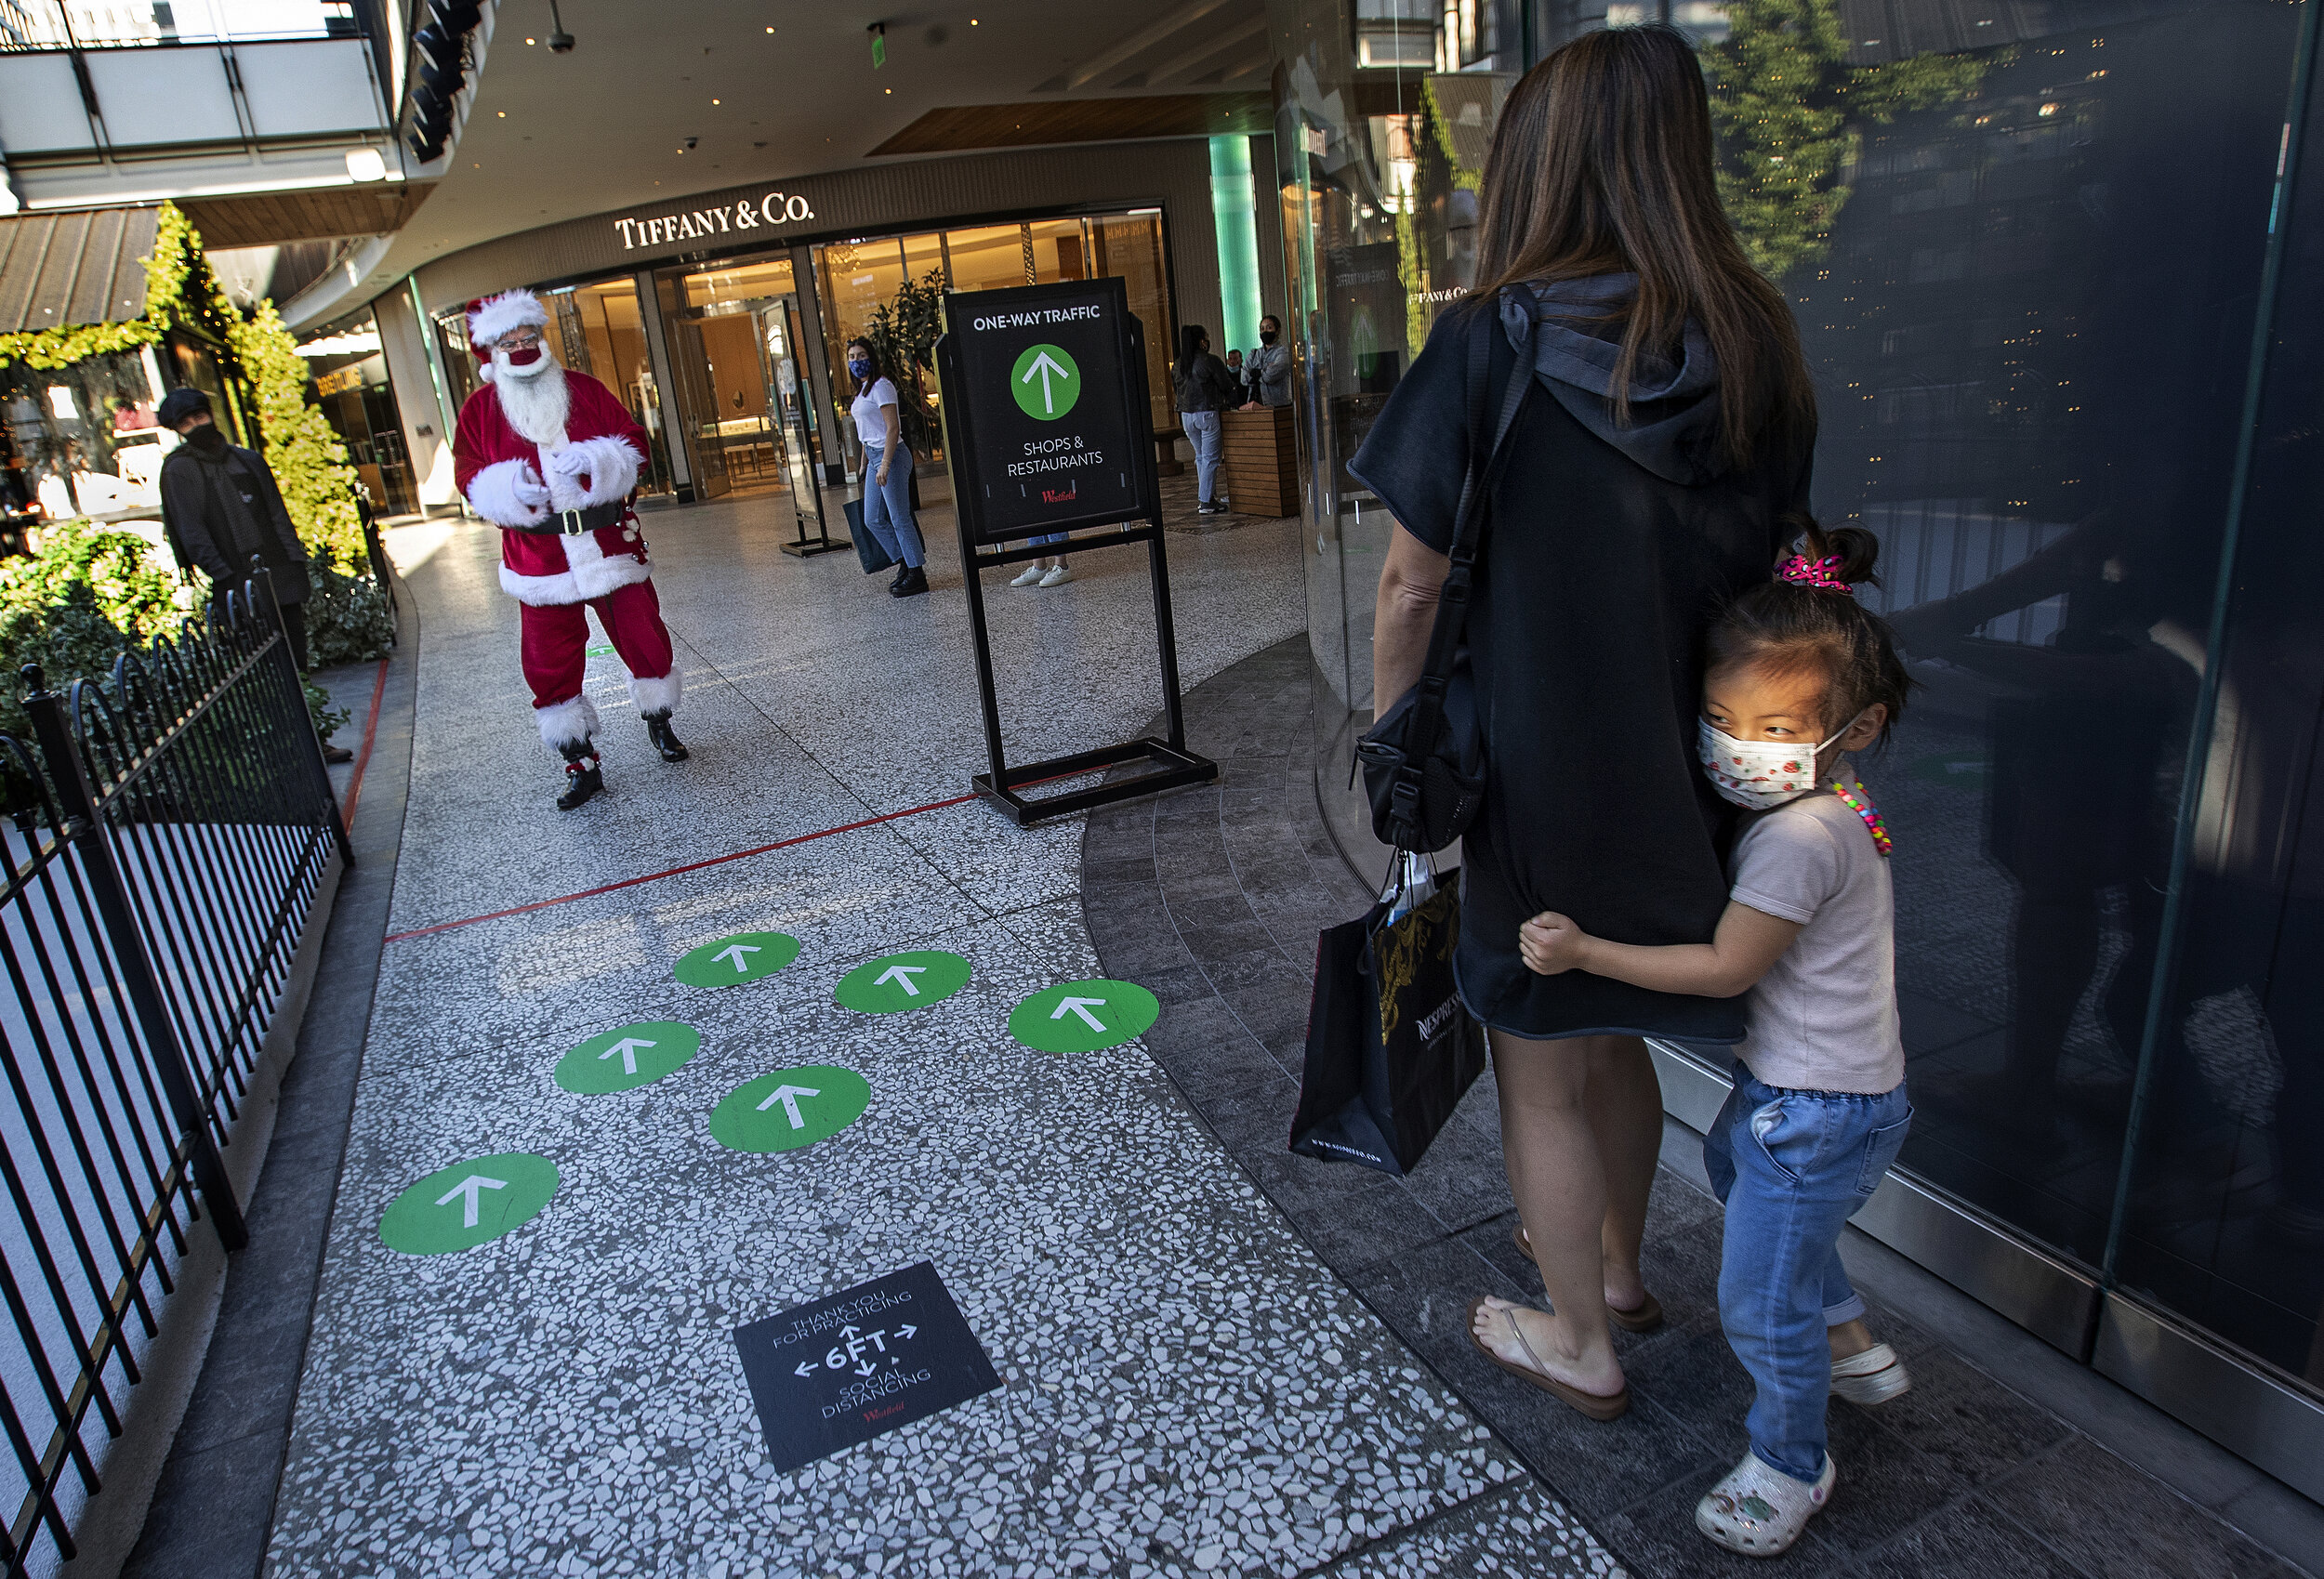  CENTURY CITY, CA - DECEMBER 03, 2020: Aerin Kim, 4, acting a little shy, hides behind her mom, Gina, after spotting Santa Claus (Larry Buckelew), at the Westfield Century City shopping mall. Santa was on his way to a lunch break. They are all wearin